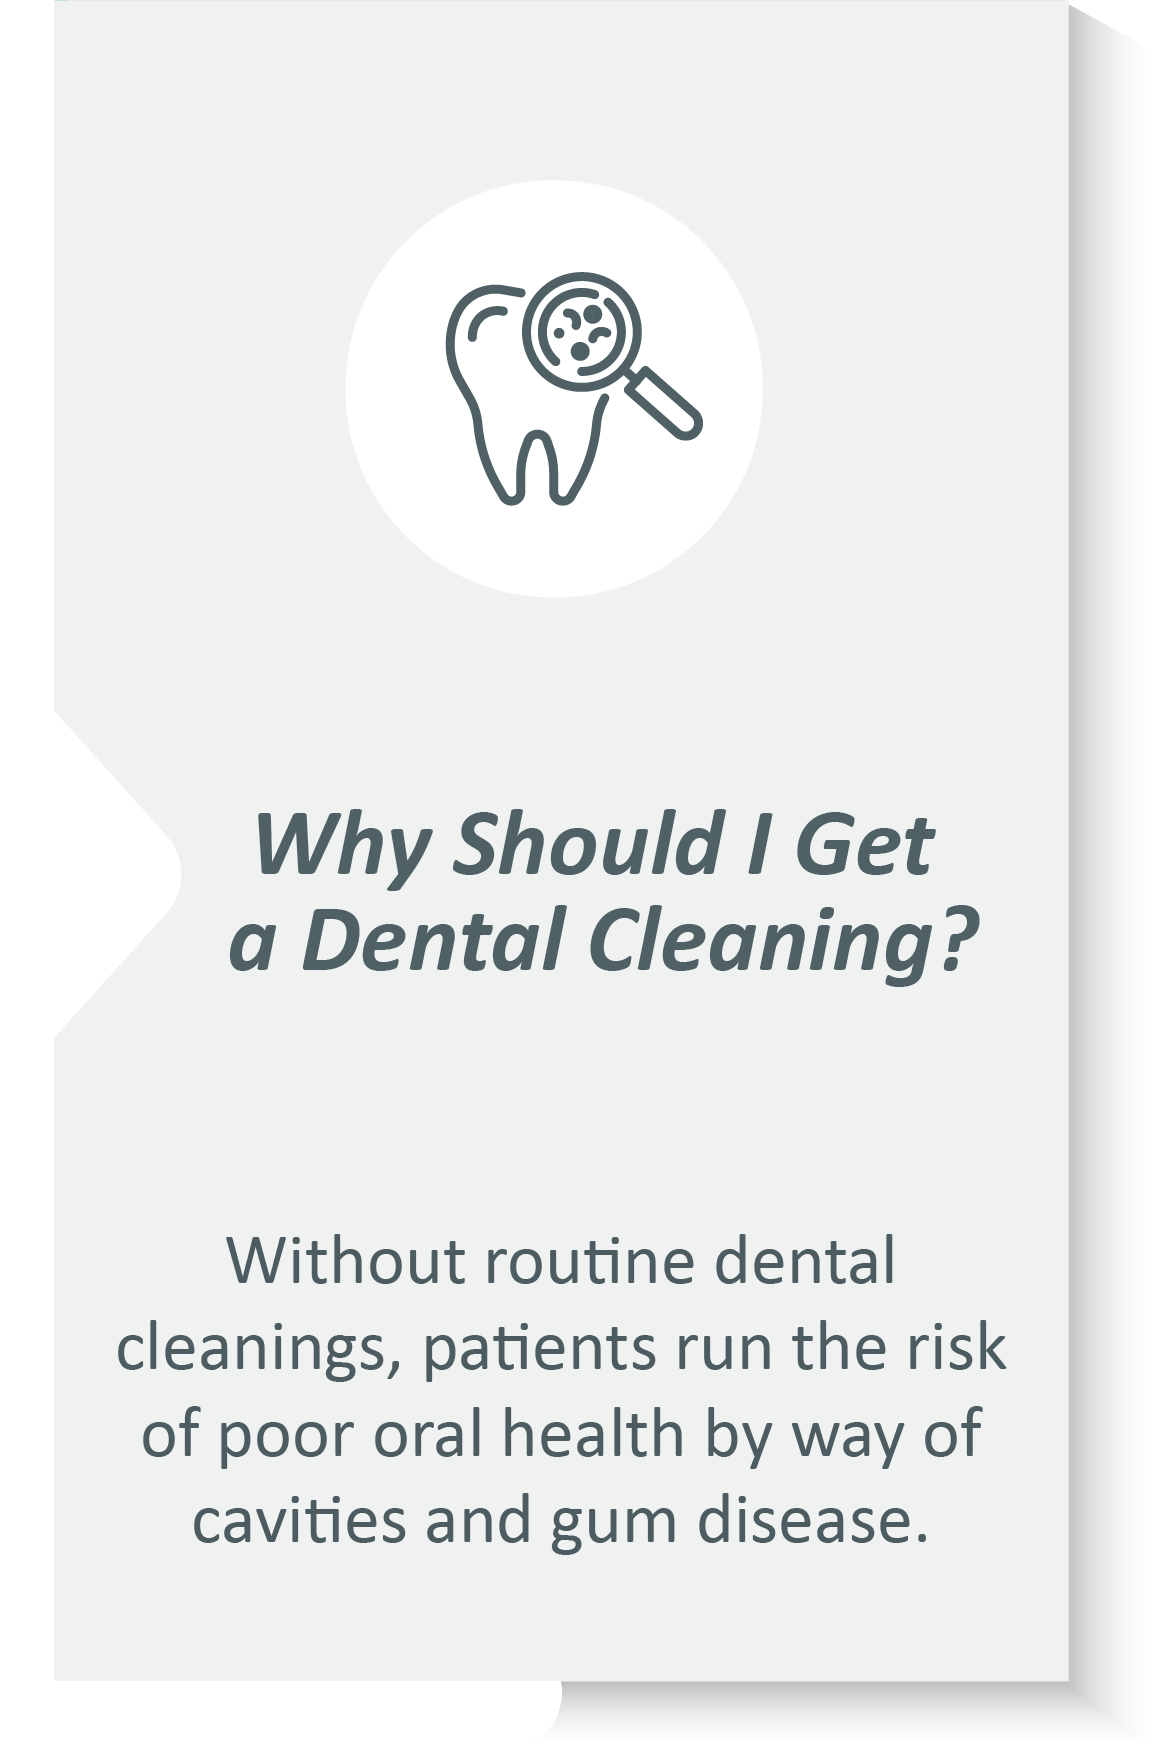 Dental cleaning infographic: Without routine dental cleanings, patients run the risk of poor oral health by way of cavities and gum disease.